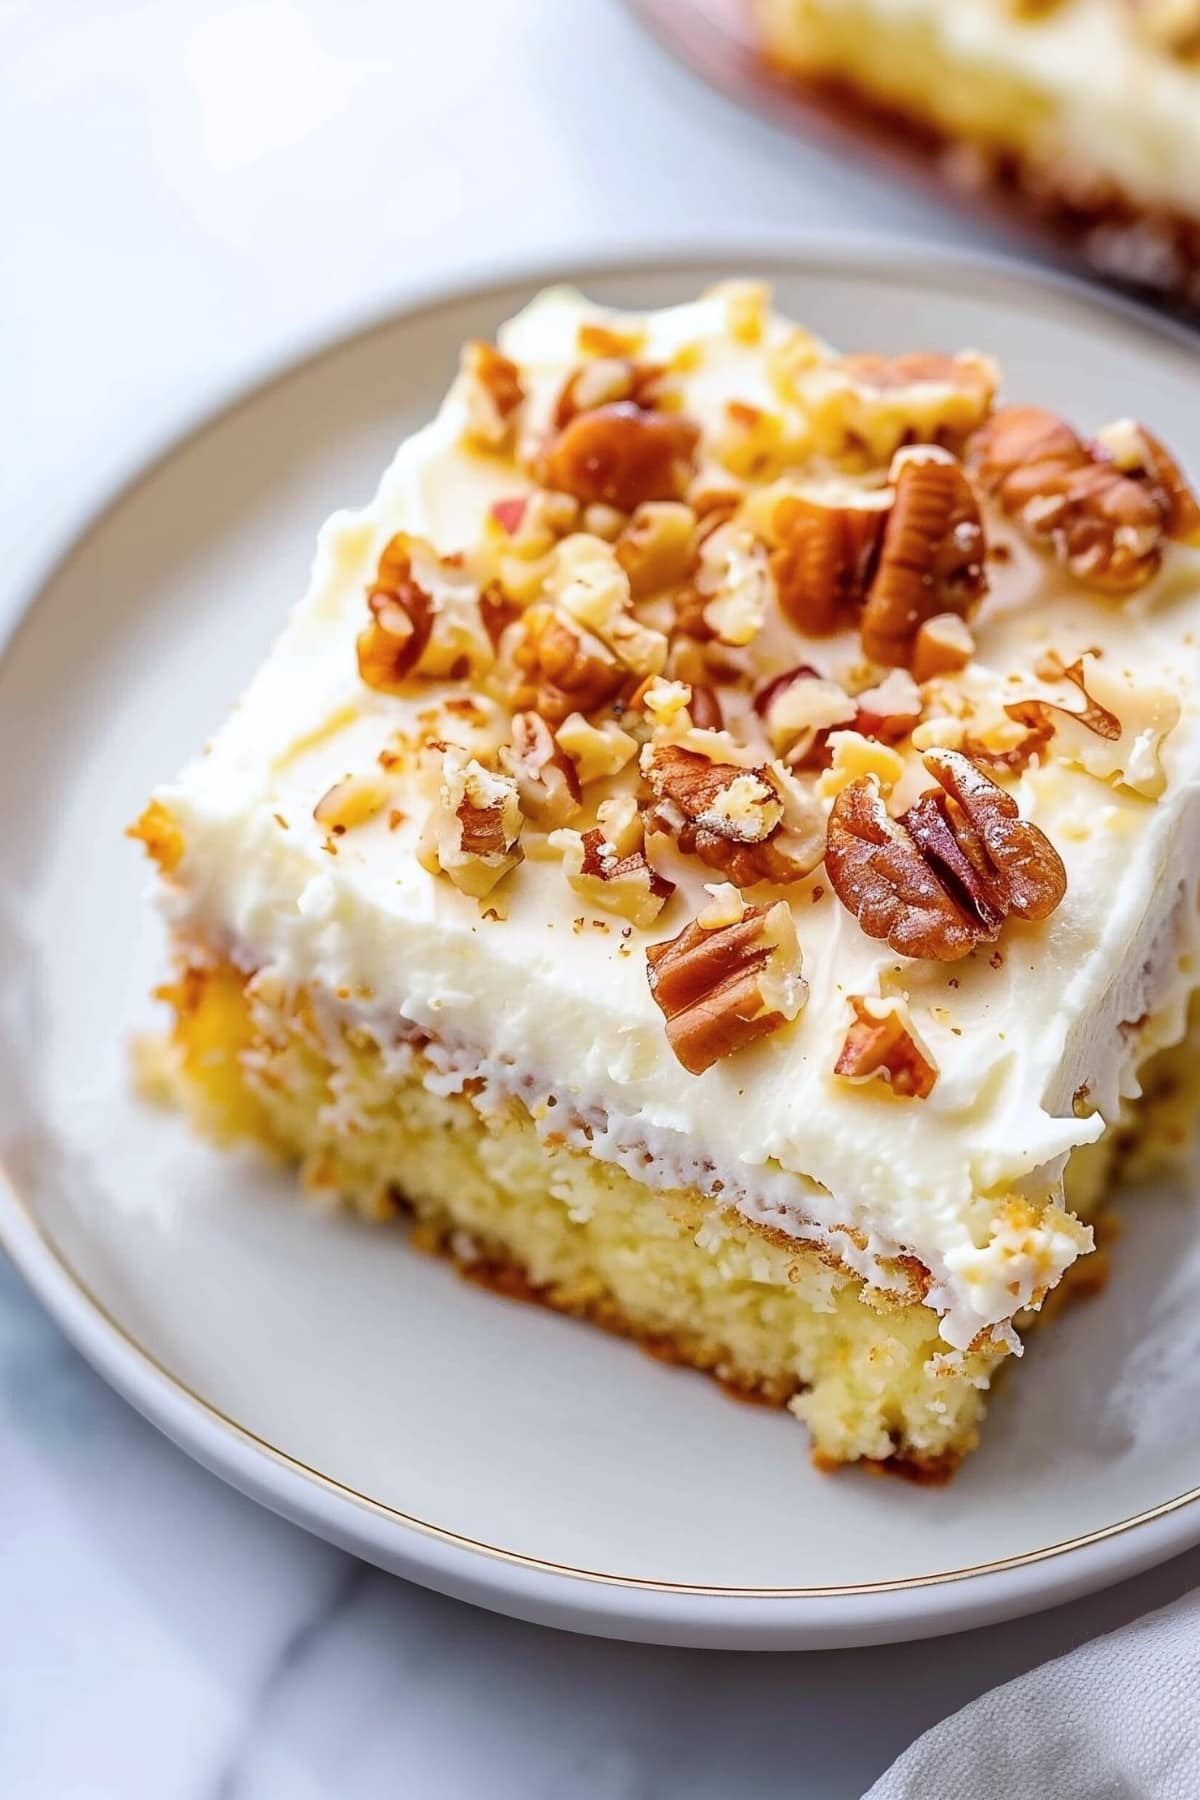 Pecan-topped Elvis Presley cake with cream cheese frosting in a white plate